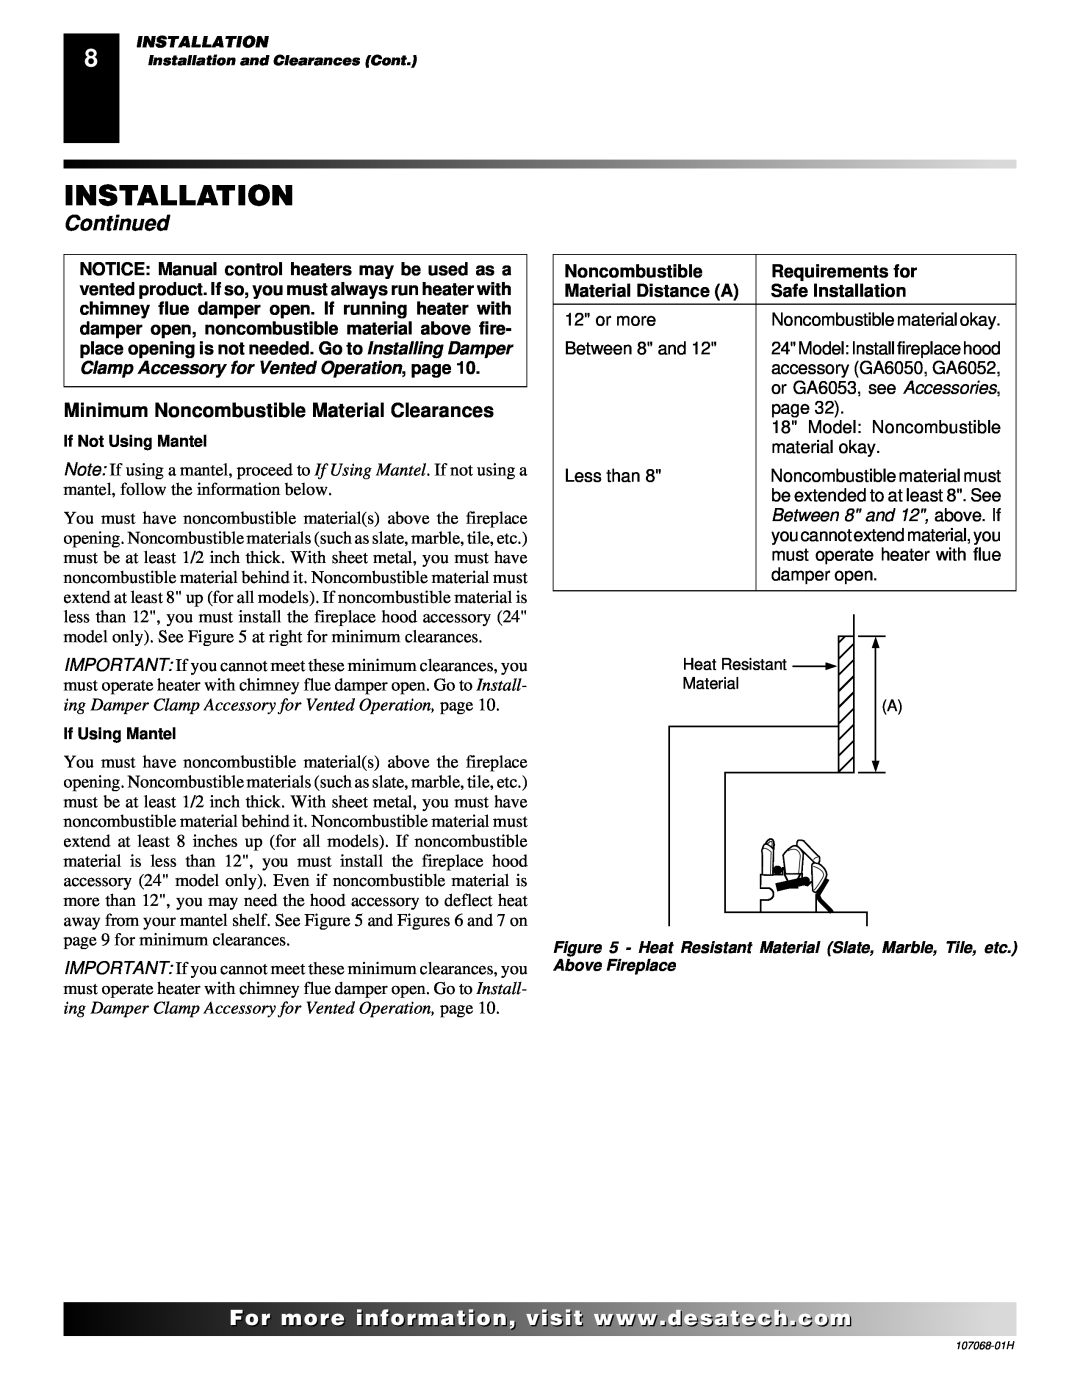 Desa CLD3018PT Installation, Continued, Minimum Noncombustible Material Clearances, Requirements for, Material Distance A 